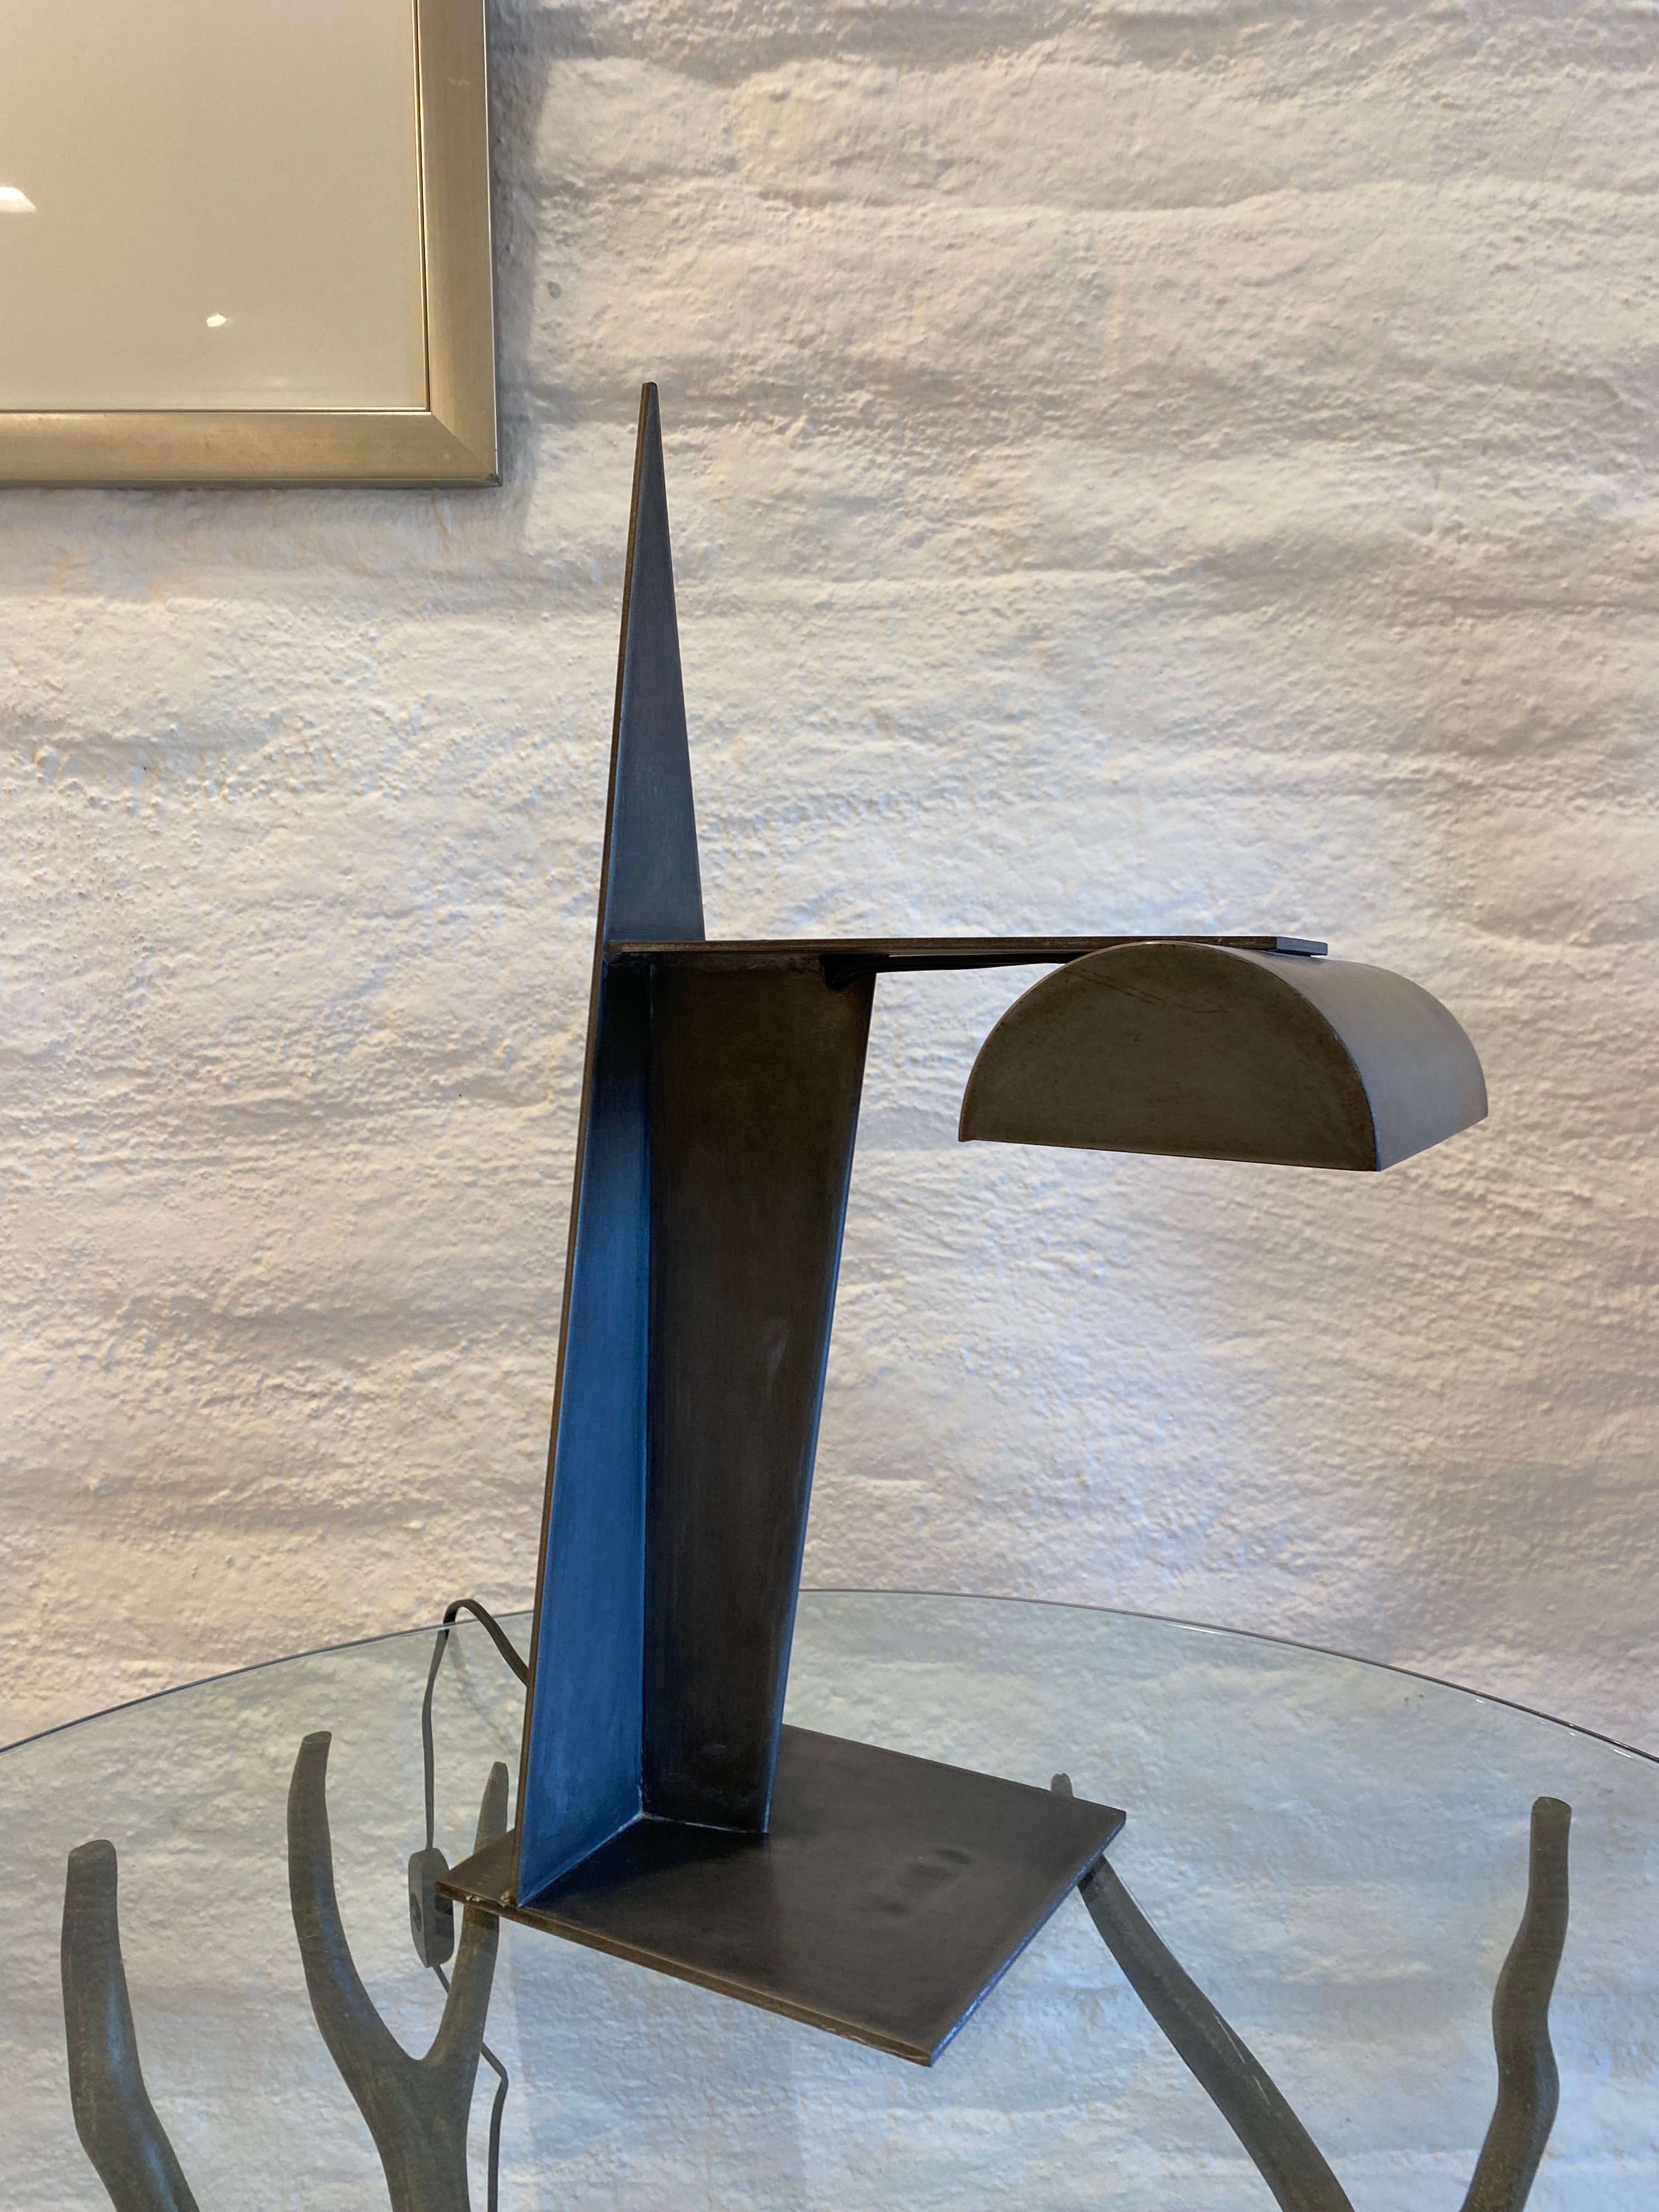 This is a wonderful brutalist metal task lamp. This lamp is styled after Gino Sarfatti's Rodchenko inspired lamp. Inspired by Aleksandr Rodchenko's stage design for Inga (1929), Gino Sarfartti produced a task lamp for Arteluce in the early 1970s.